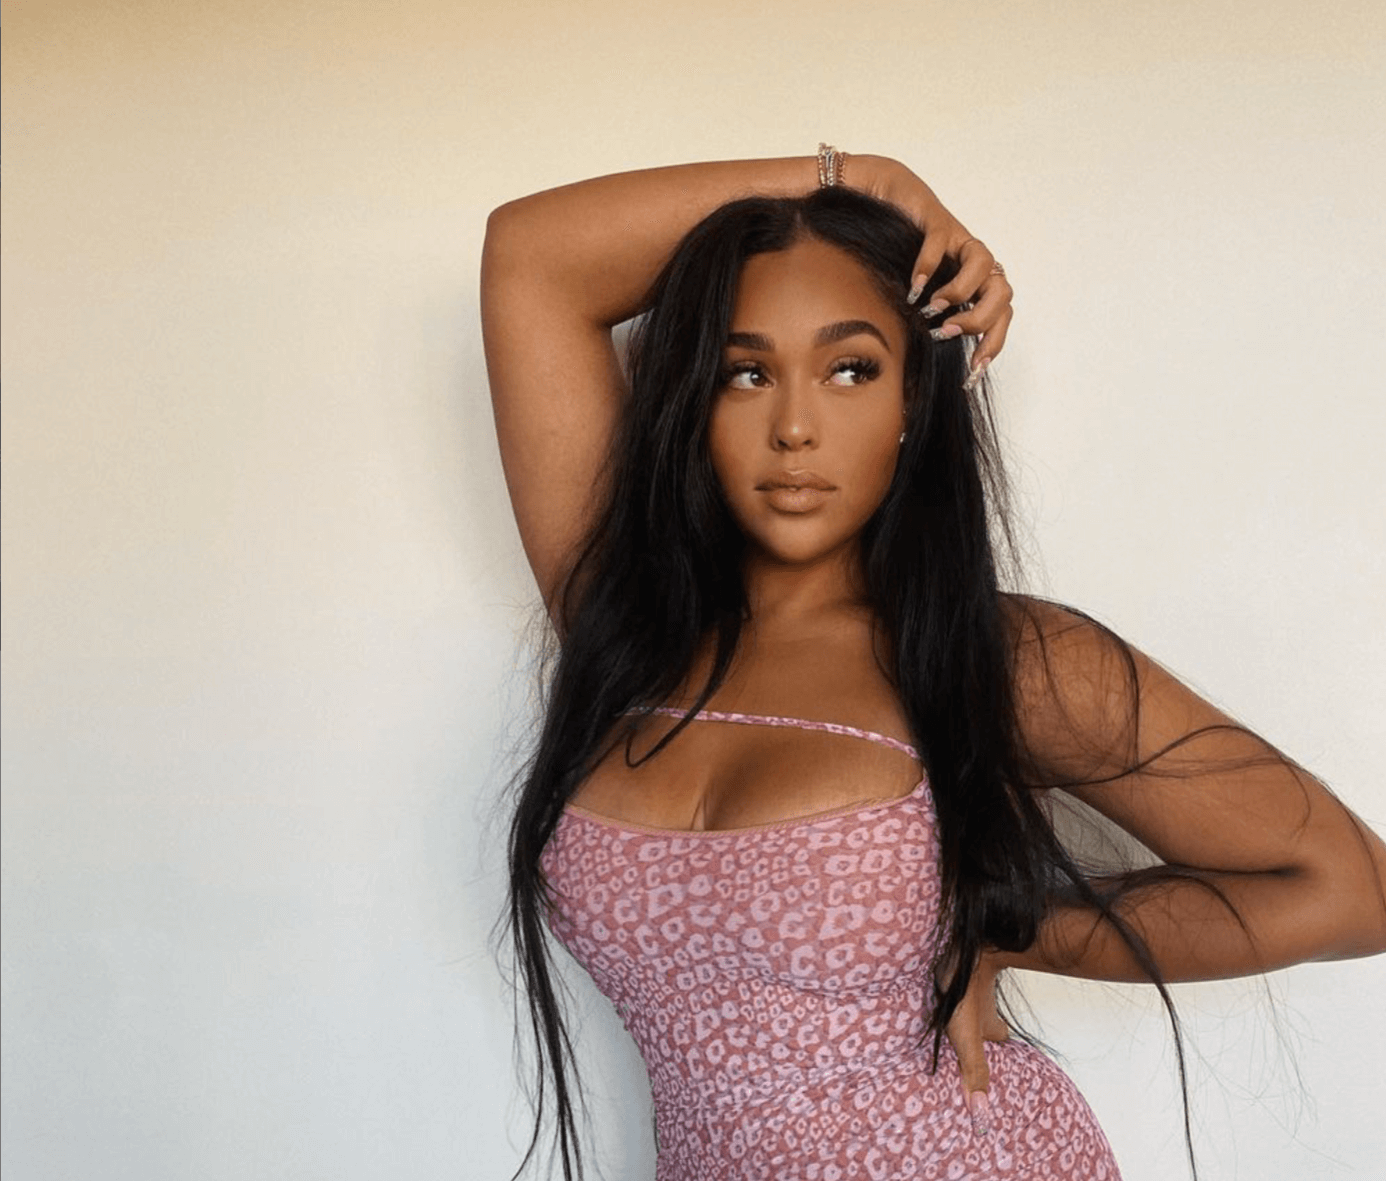 jordyn-woods-talks-about-her-fitness-journey-check-out-her-message